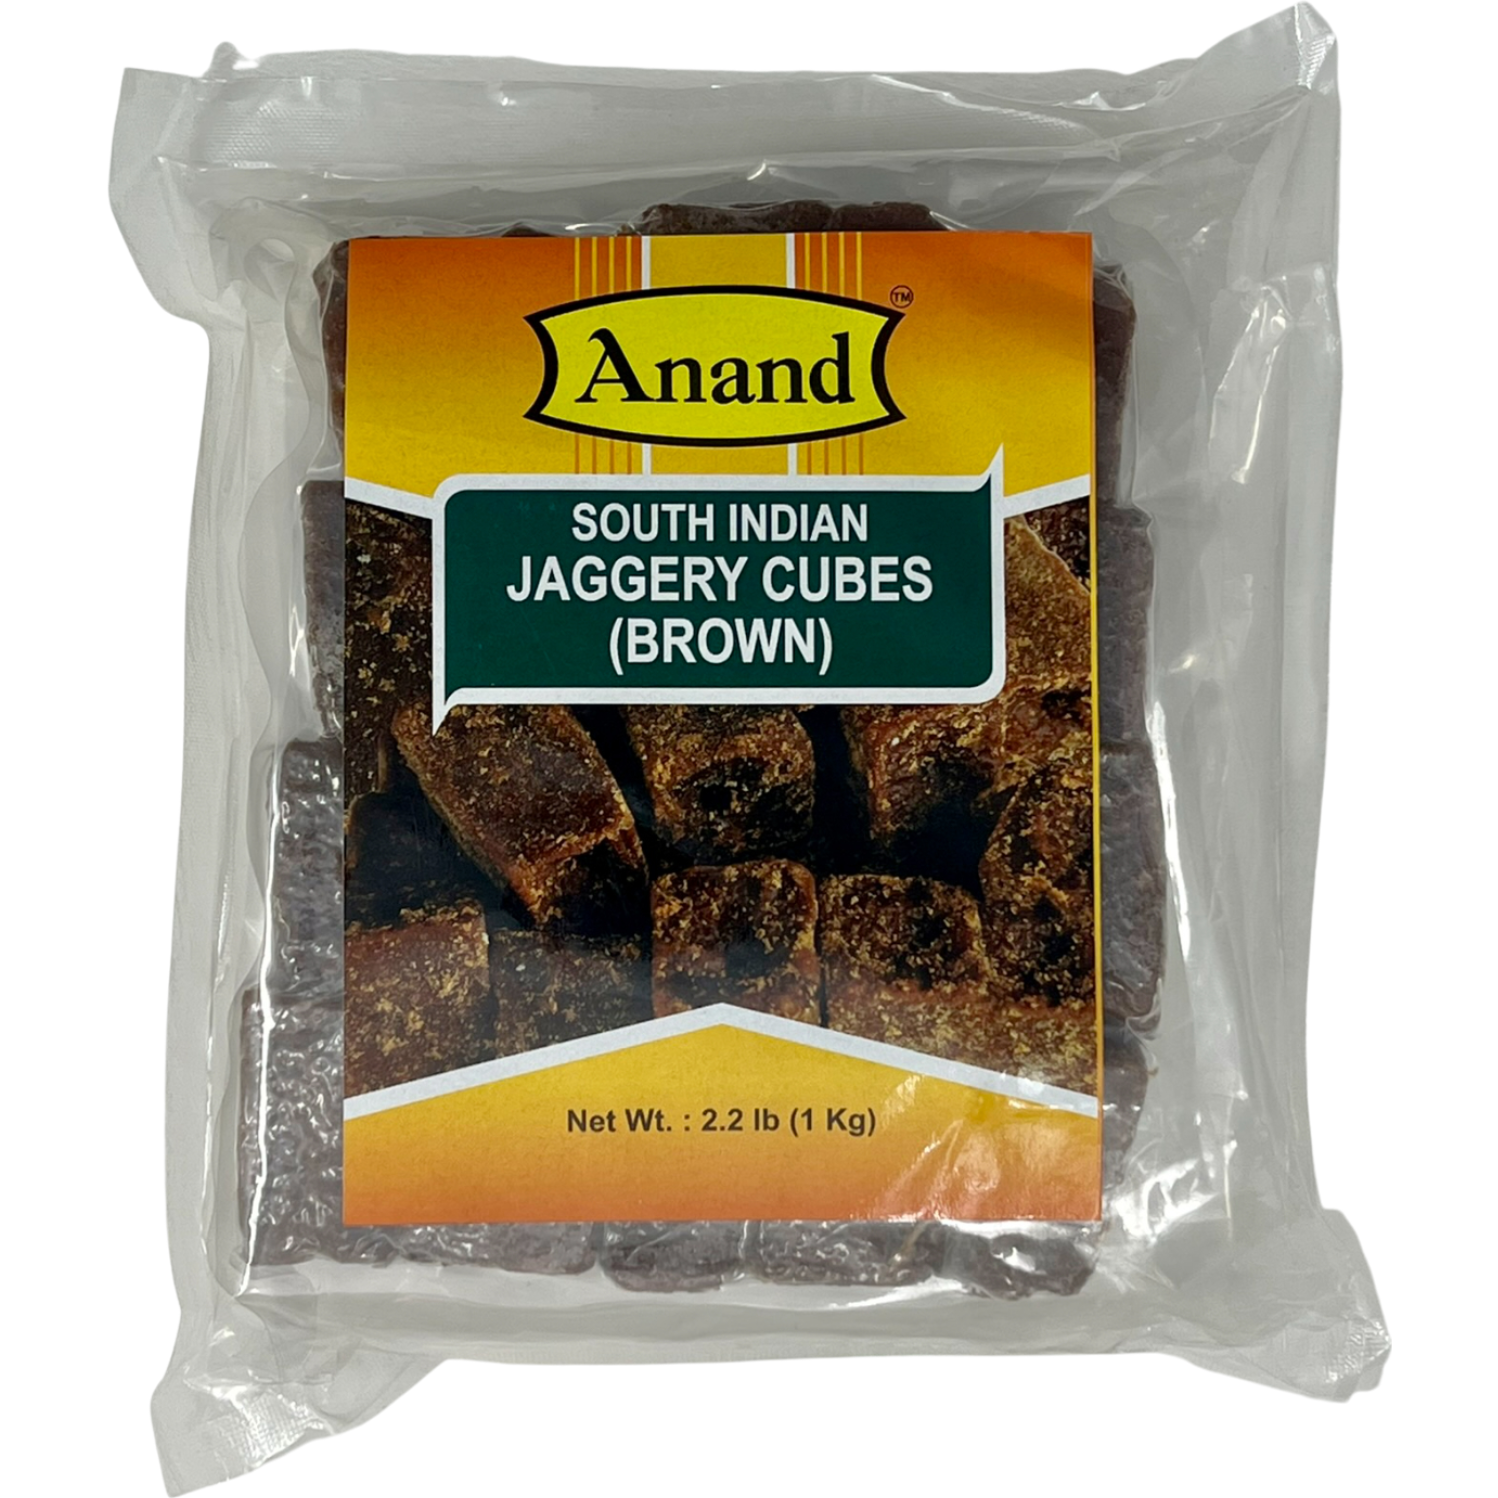 Anand South Indian Jaggery Cubes Brown - 1 Kg (2.2 Lb)